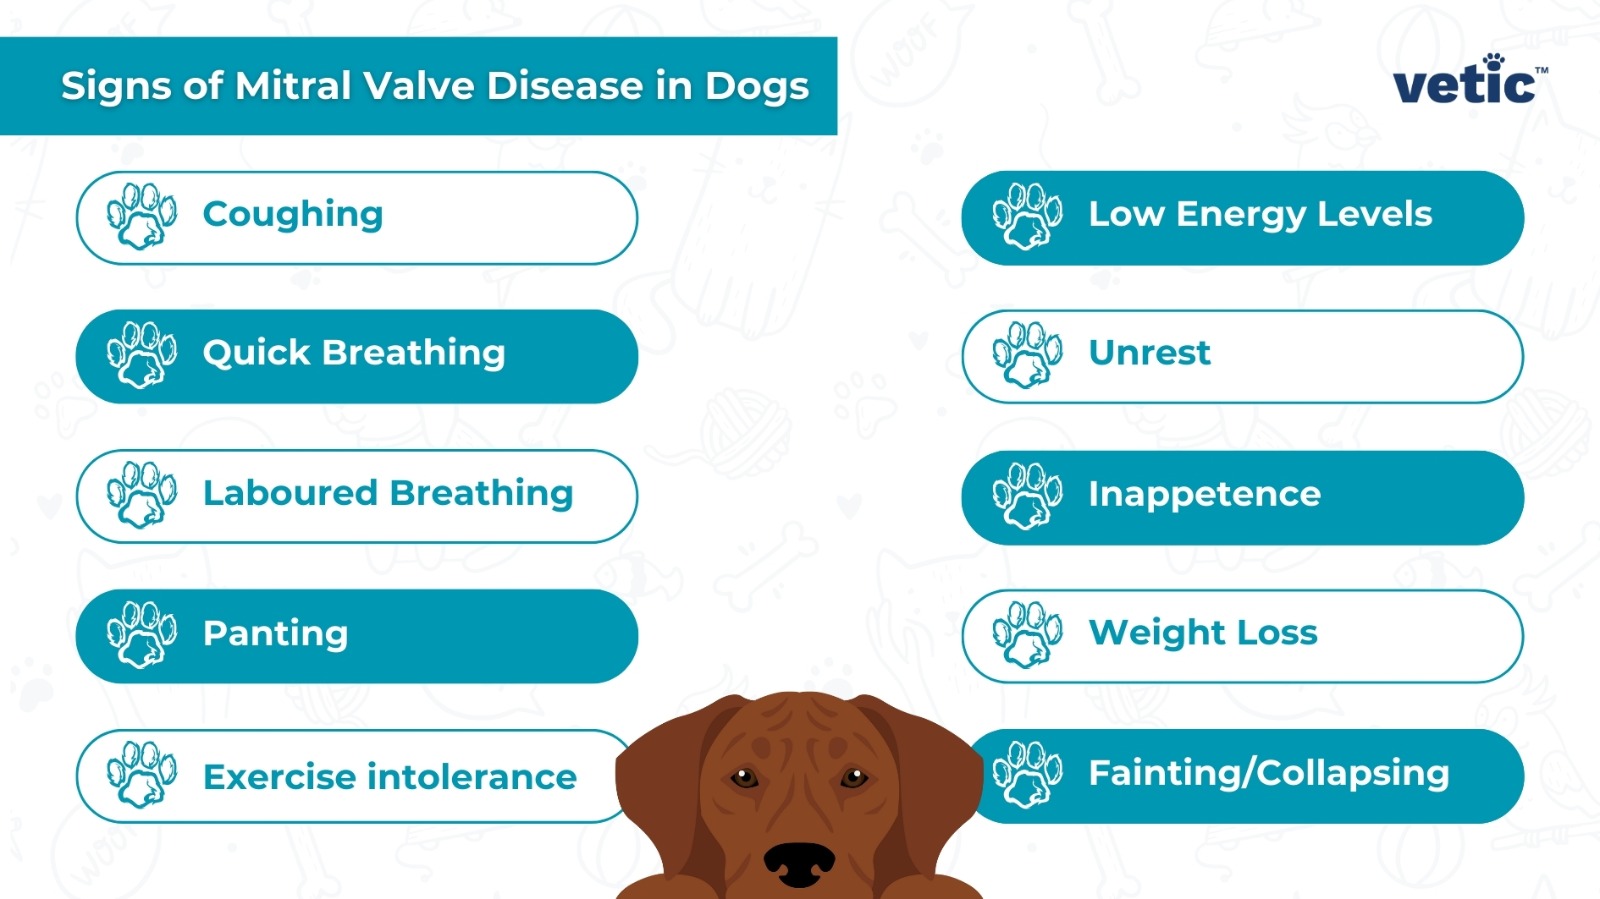 Signs of Mitral Valve Disease in Dogs Coughing Quick Breathing Laboured Breathing Panting Exercise intolerance Low Energy Levels Unrest Inappetence Weight Loss Fainting/Collapsing